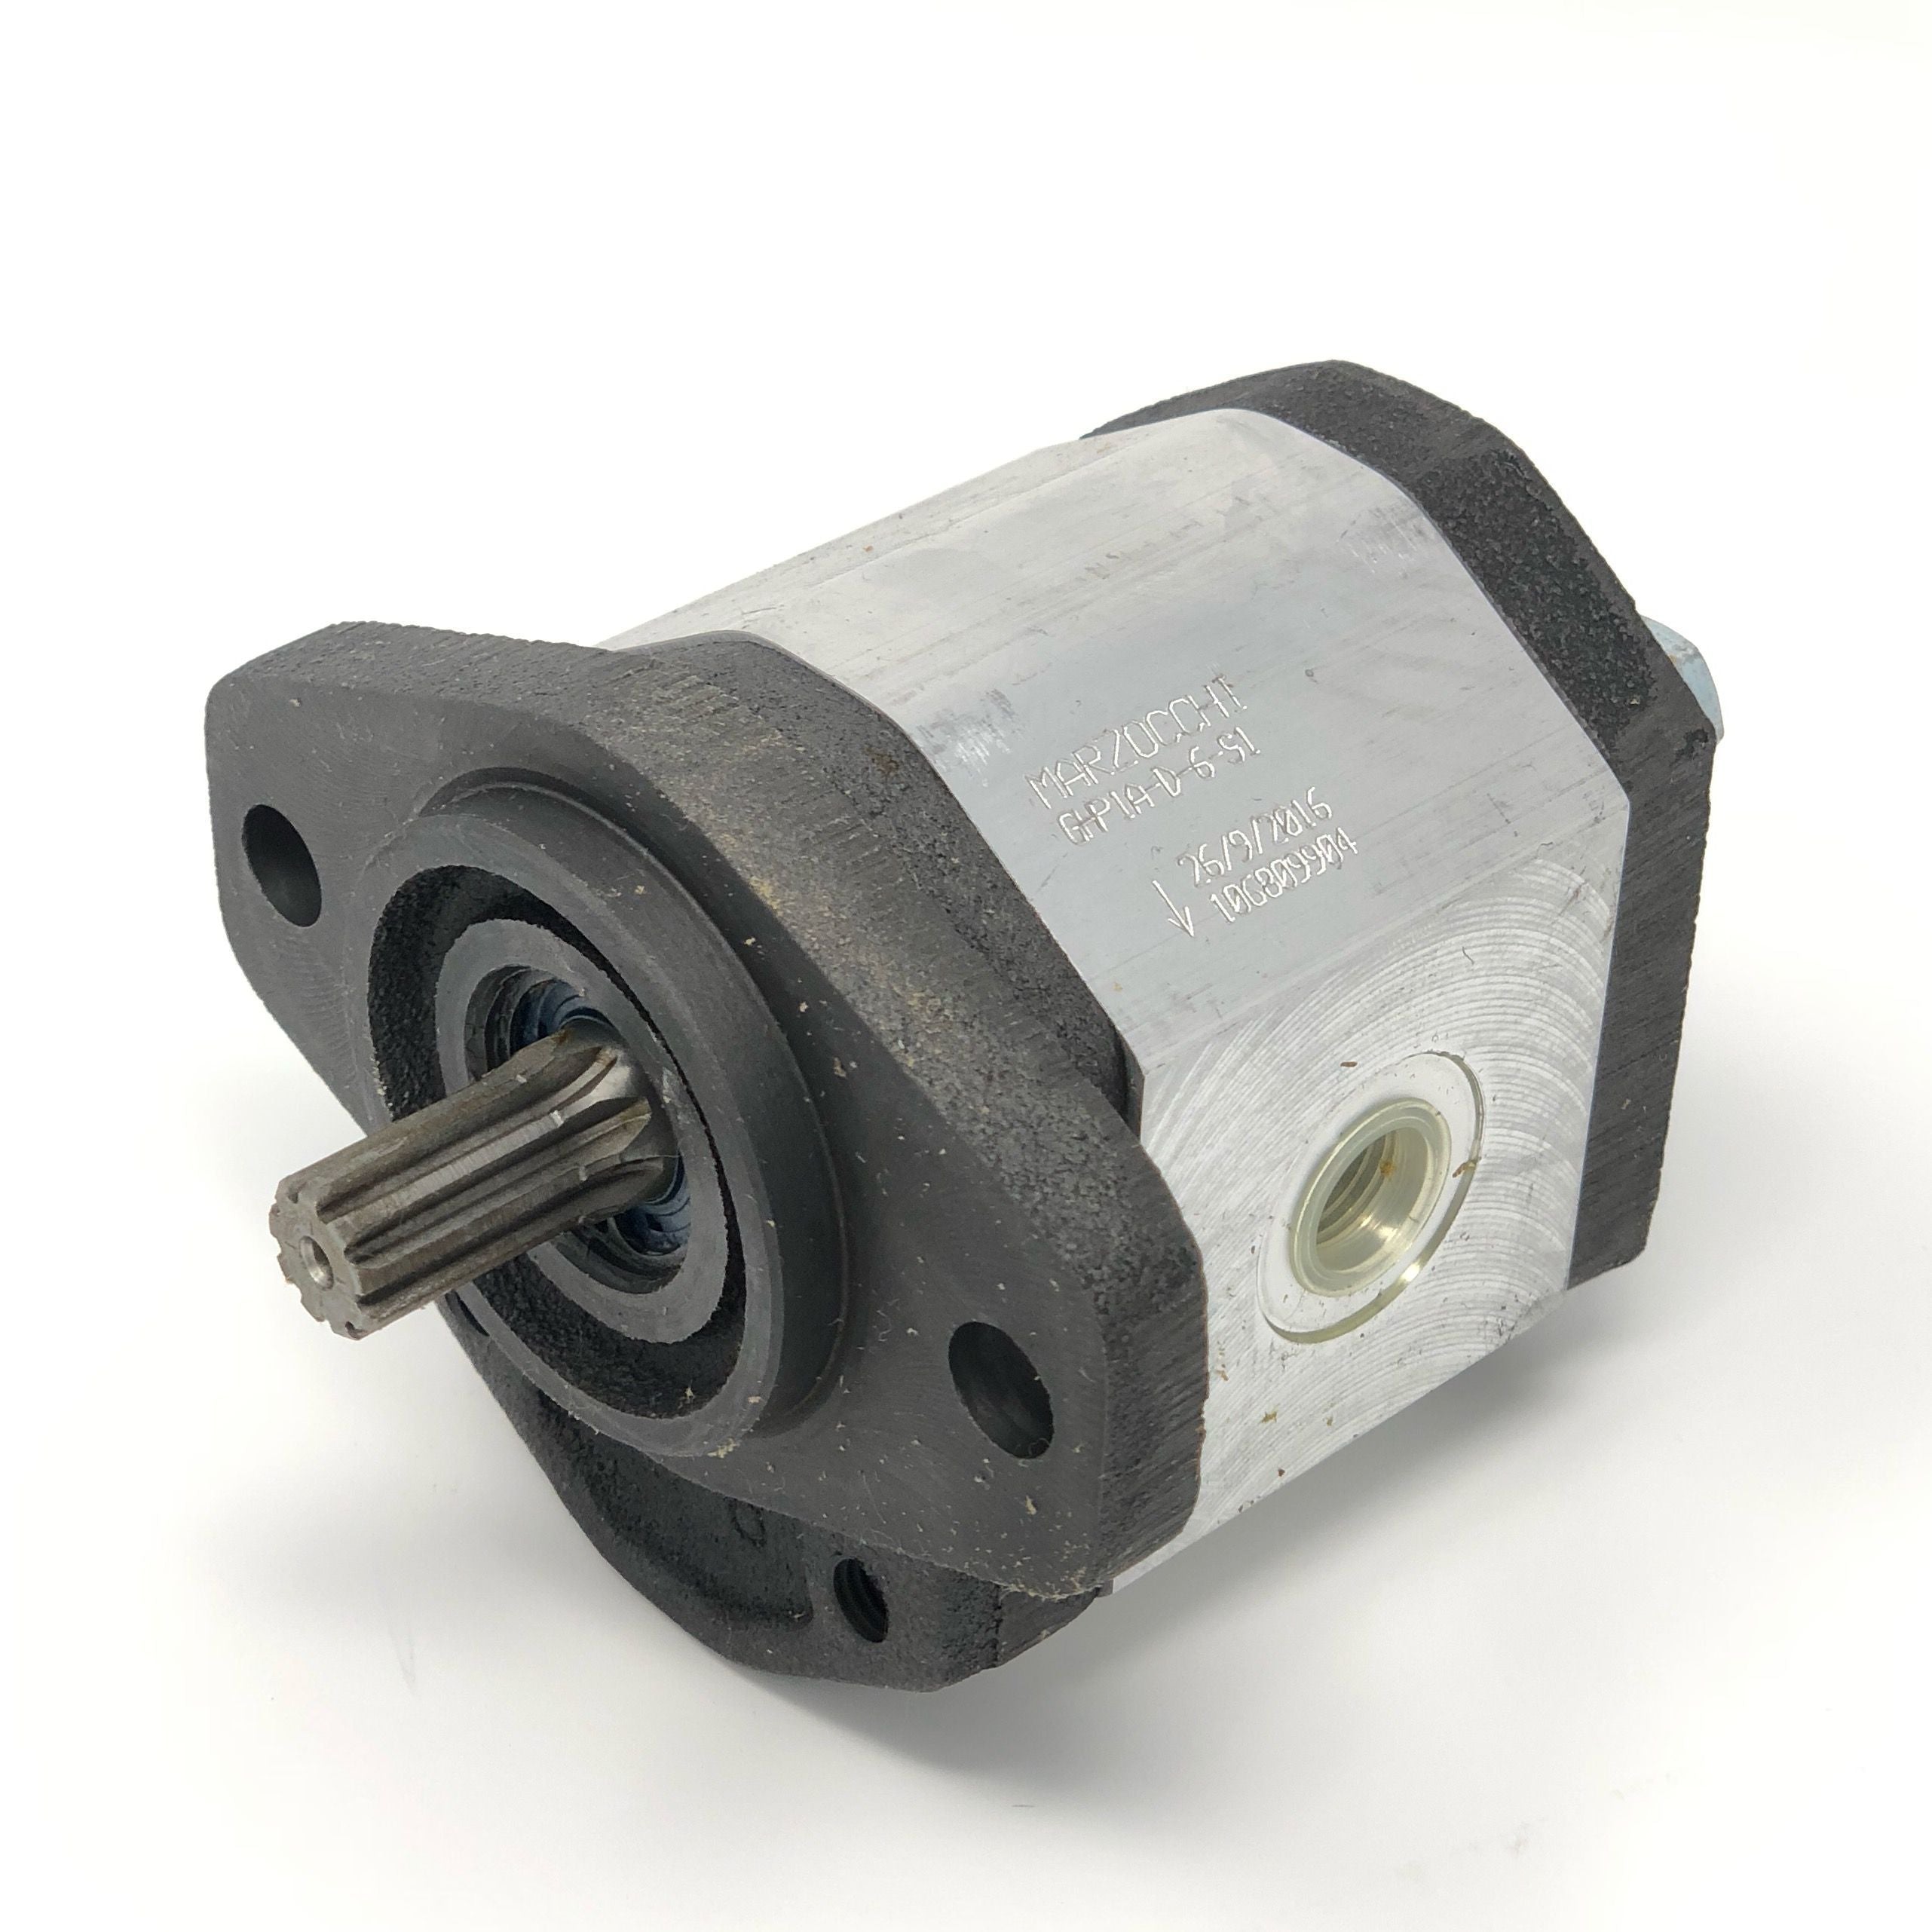 GHP1A-S-2-S1 : Marzocchi Gear Pump, CCW, 1.4cc (0.0854in3), 0.67 GPM, 3915psi, 6000 RPM, #8 SAE (1/2") In, #6 SAE (3/8") Out, Splined Shaft 9T 20/40DP, SAE AA 2-Bolt Mount